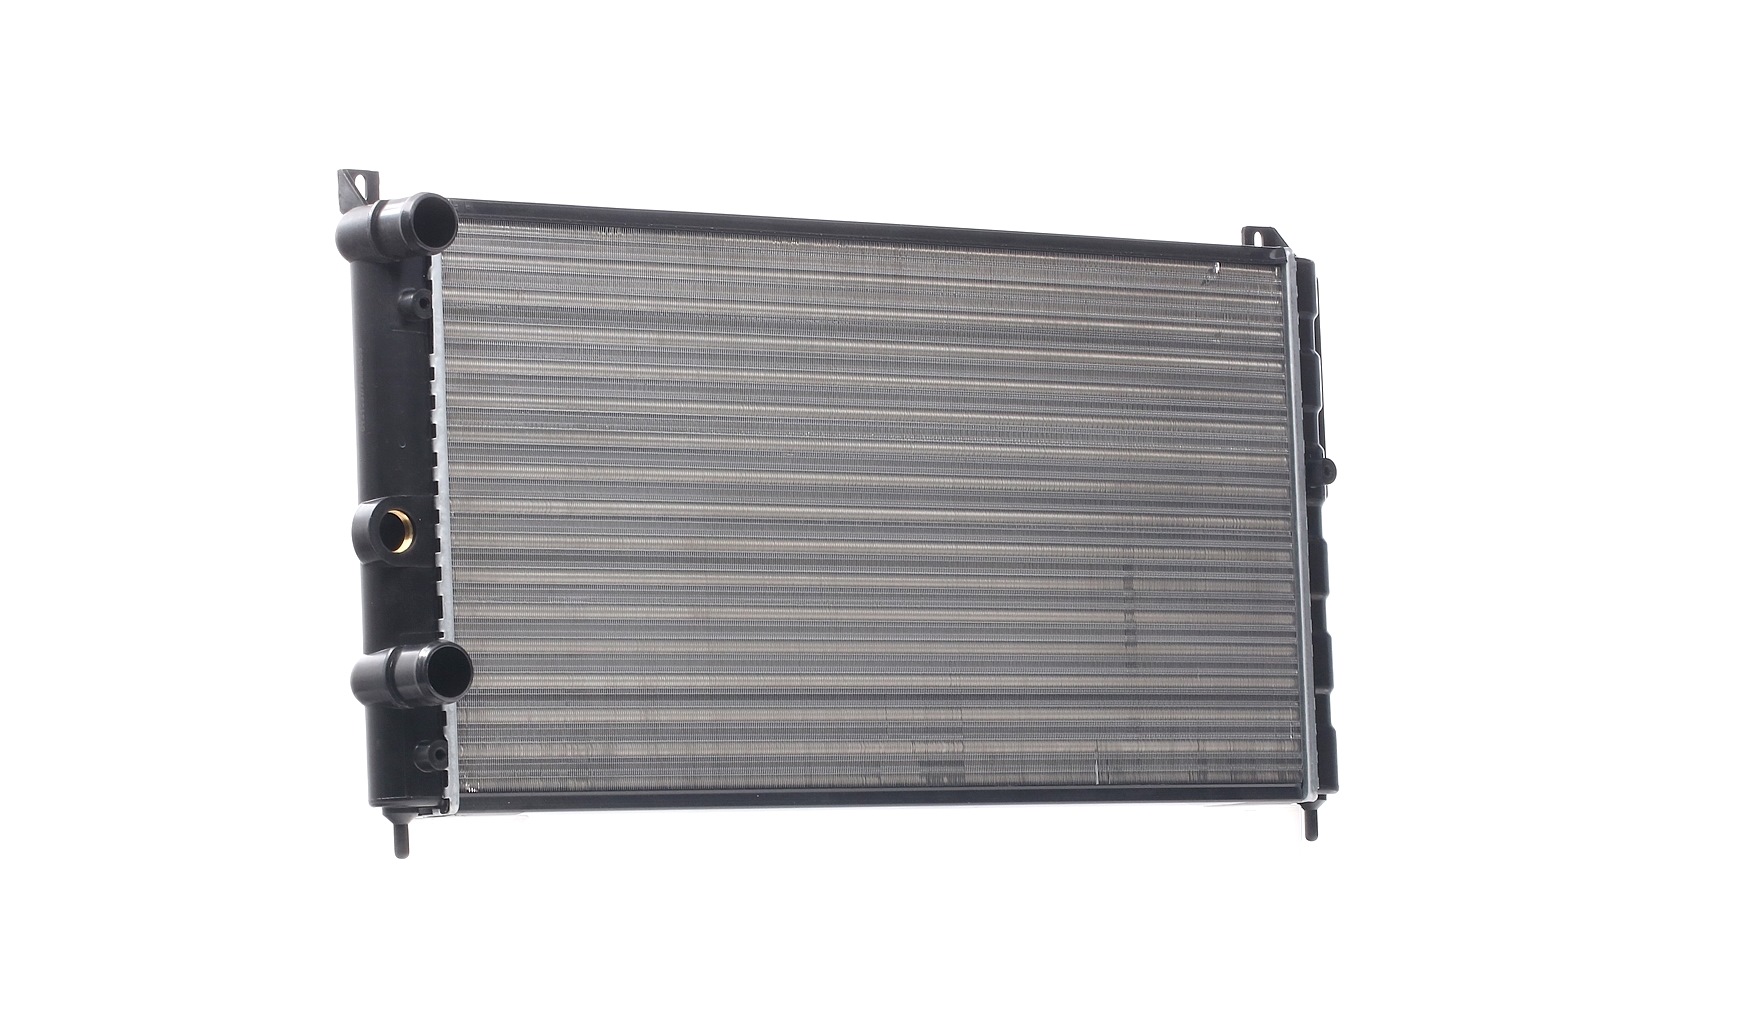 STARK SKRD-0120325 Engine radiator Aluminium, Plastic, for vehicles with/without air conditioning, without frame, Manual Transmission